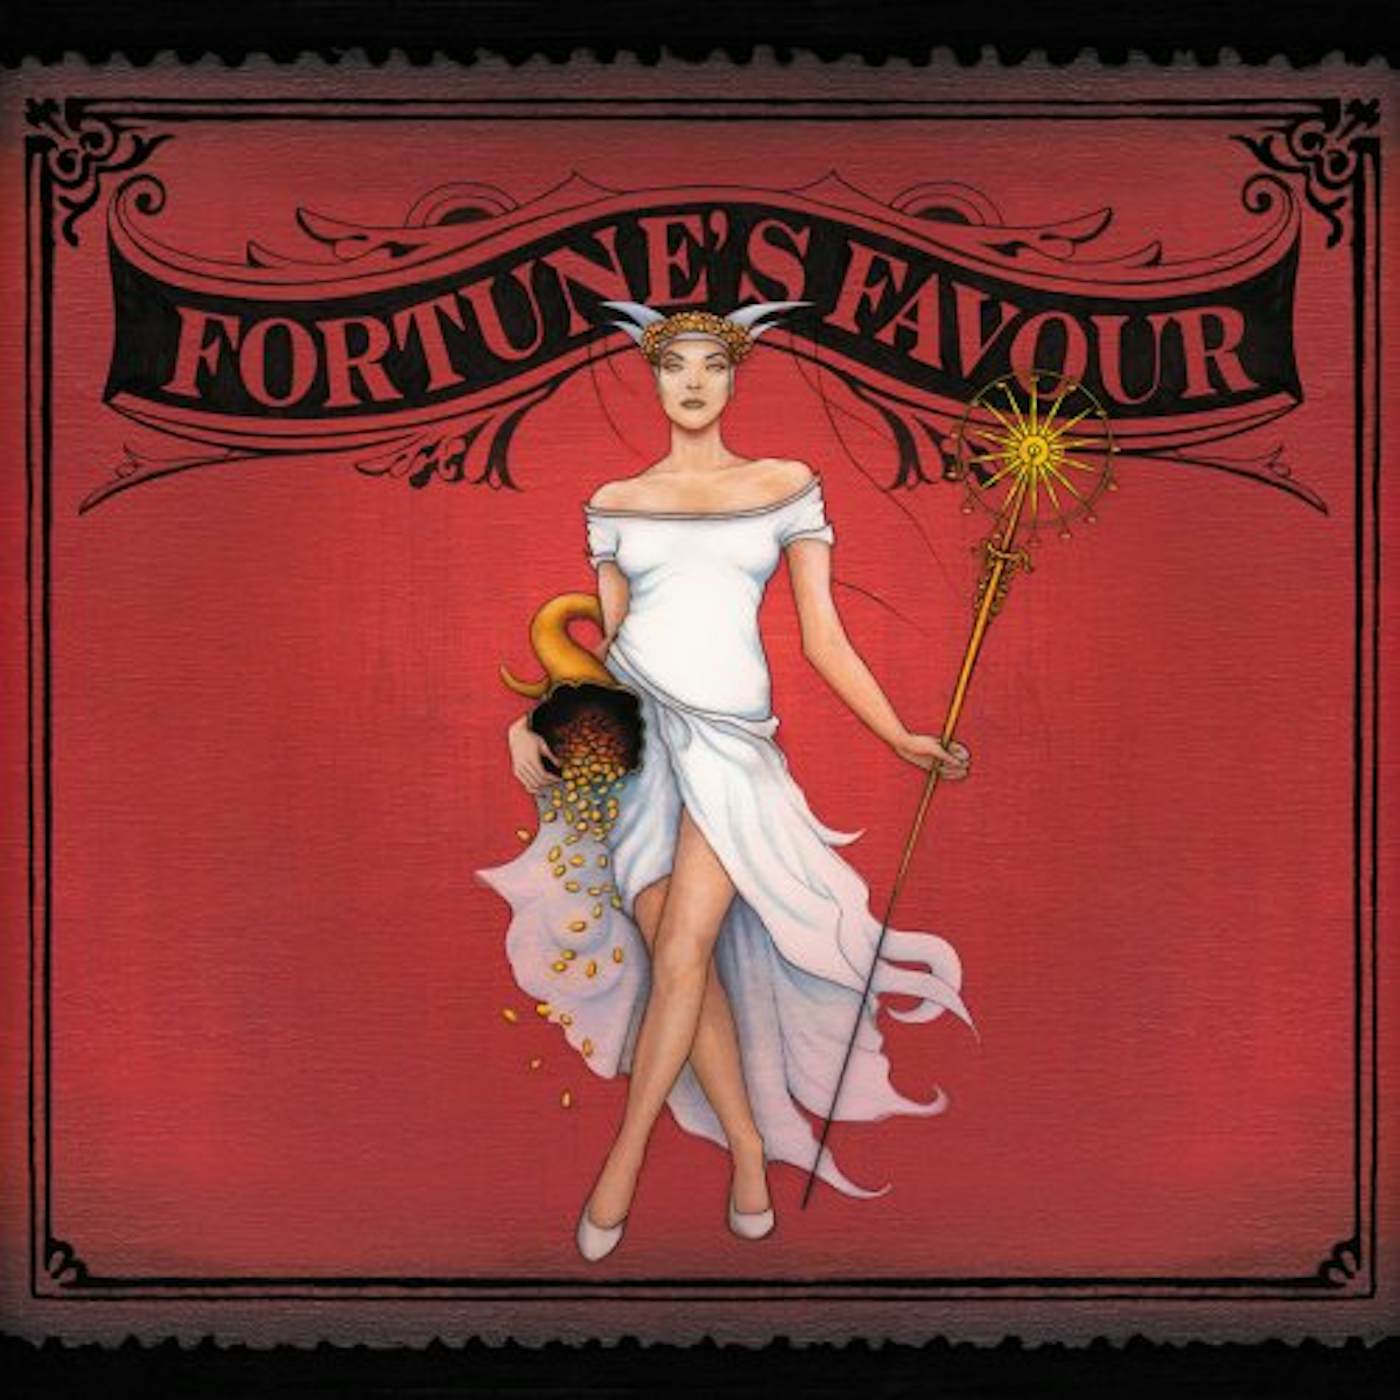 Great Big Sea FORTUNE'S FAVOUR CD